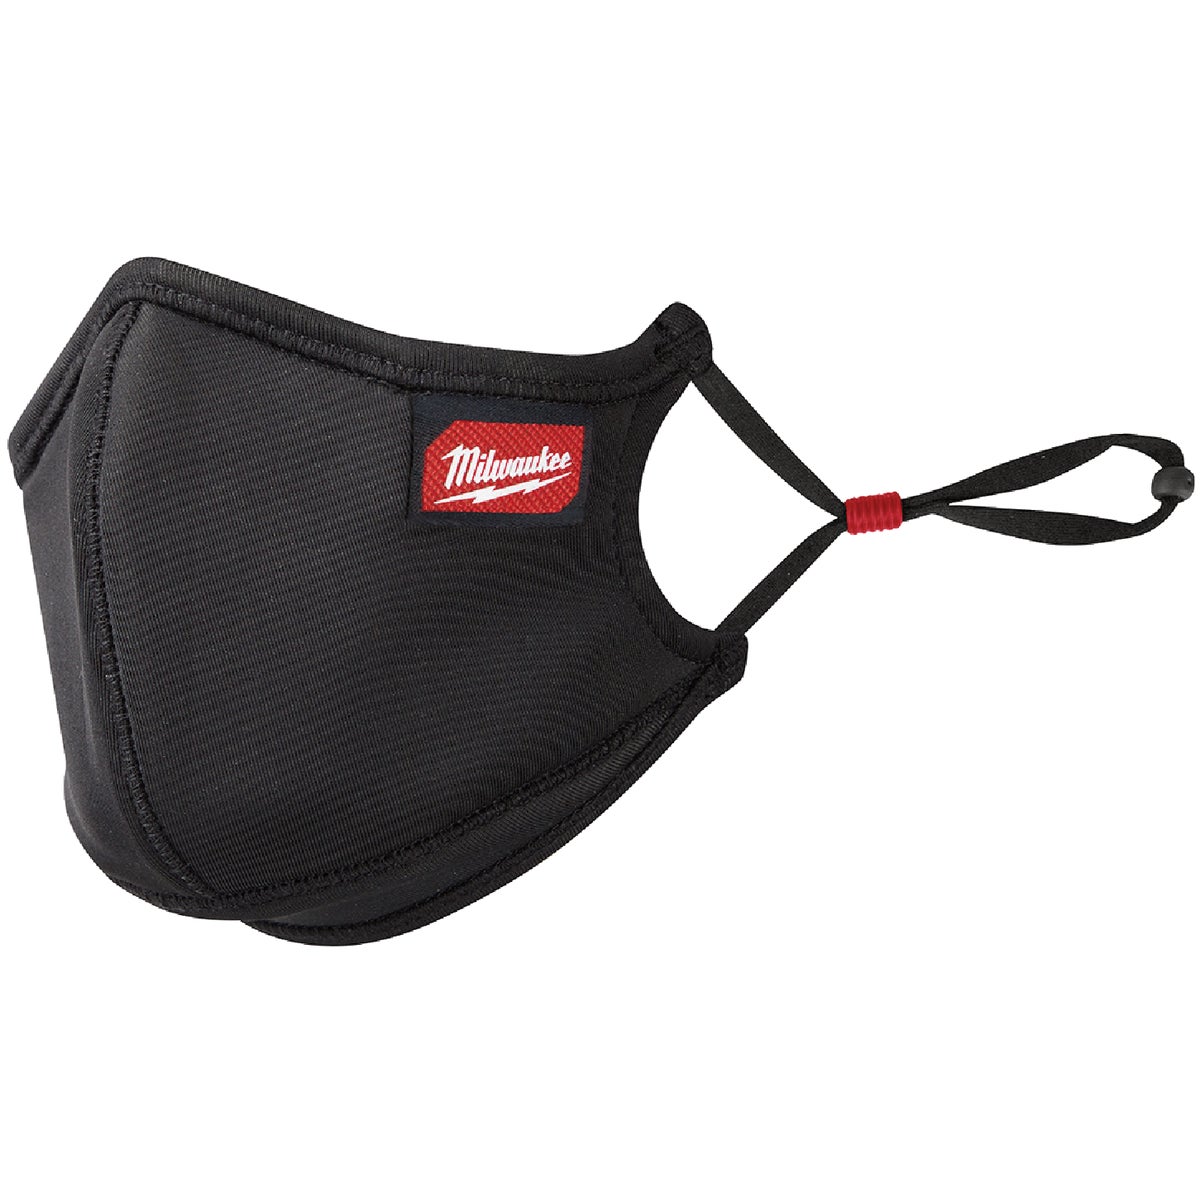 Milwaukee S/M 3-Layer Washable Performance Dust & Face Mask